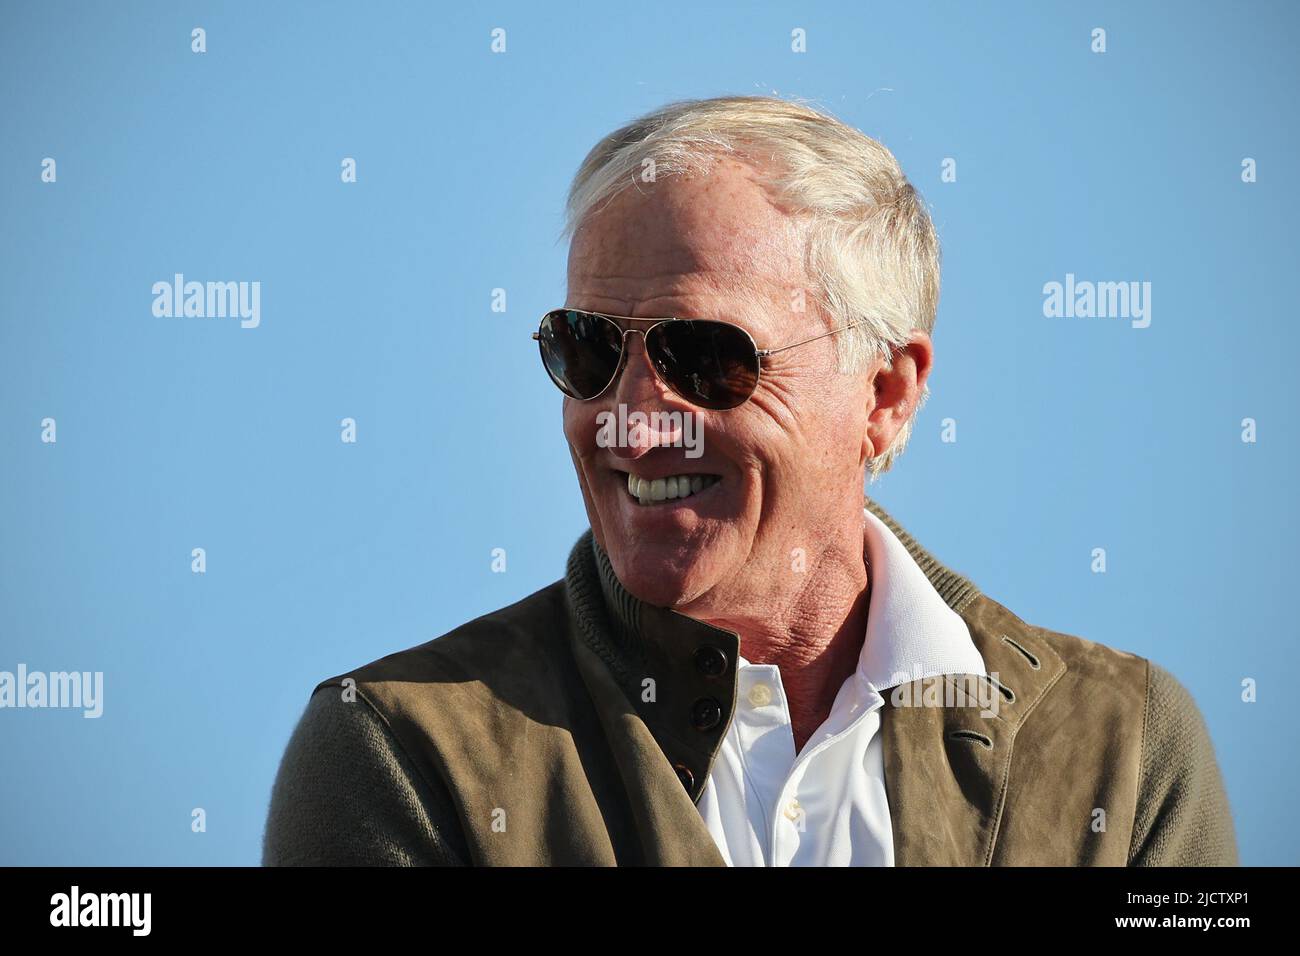 Greg Norman, Australian entrepreneur and retired professional golfer. In 2021, he was named CEO of LIV Golf Investments. Stock Photo